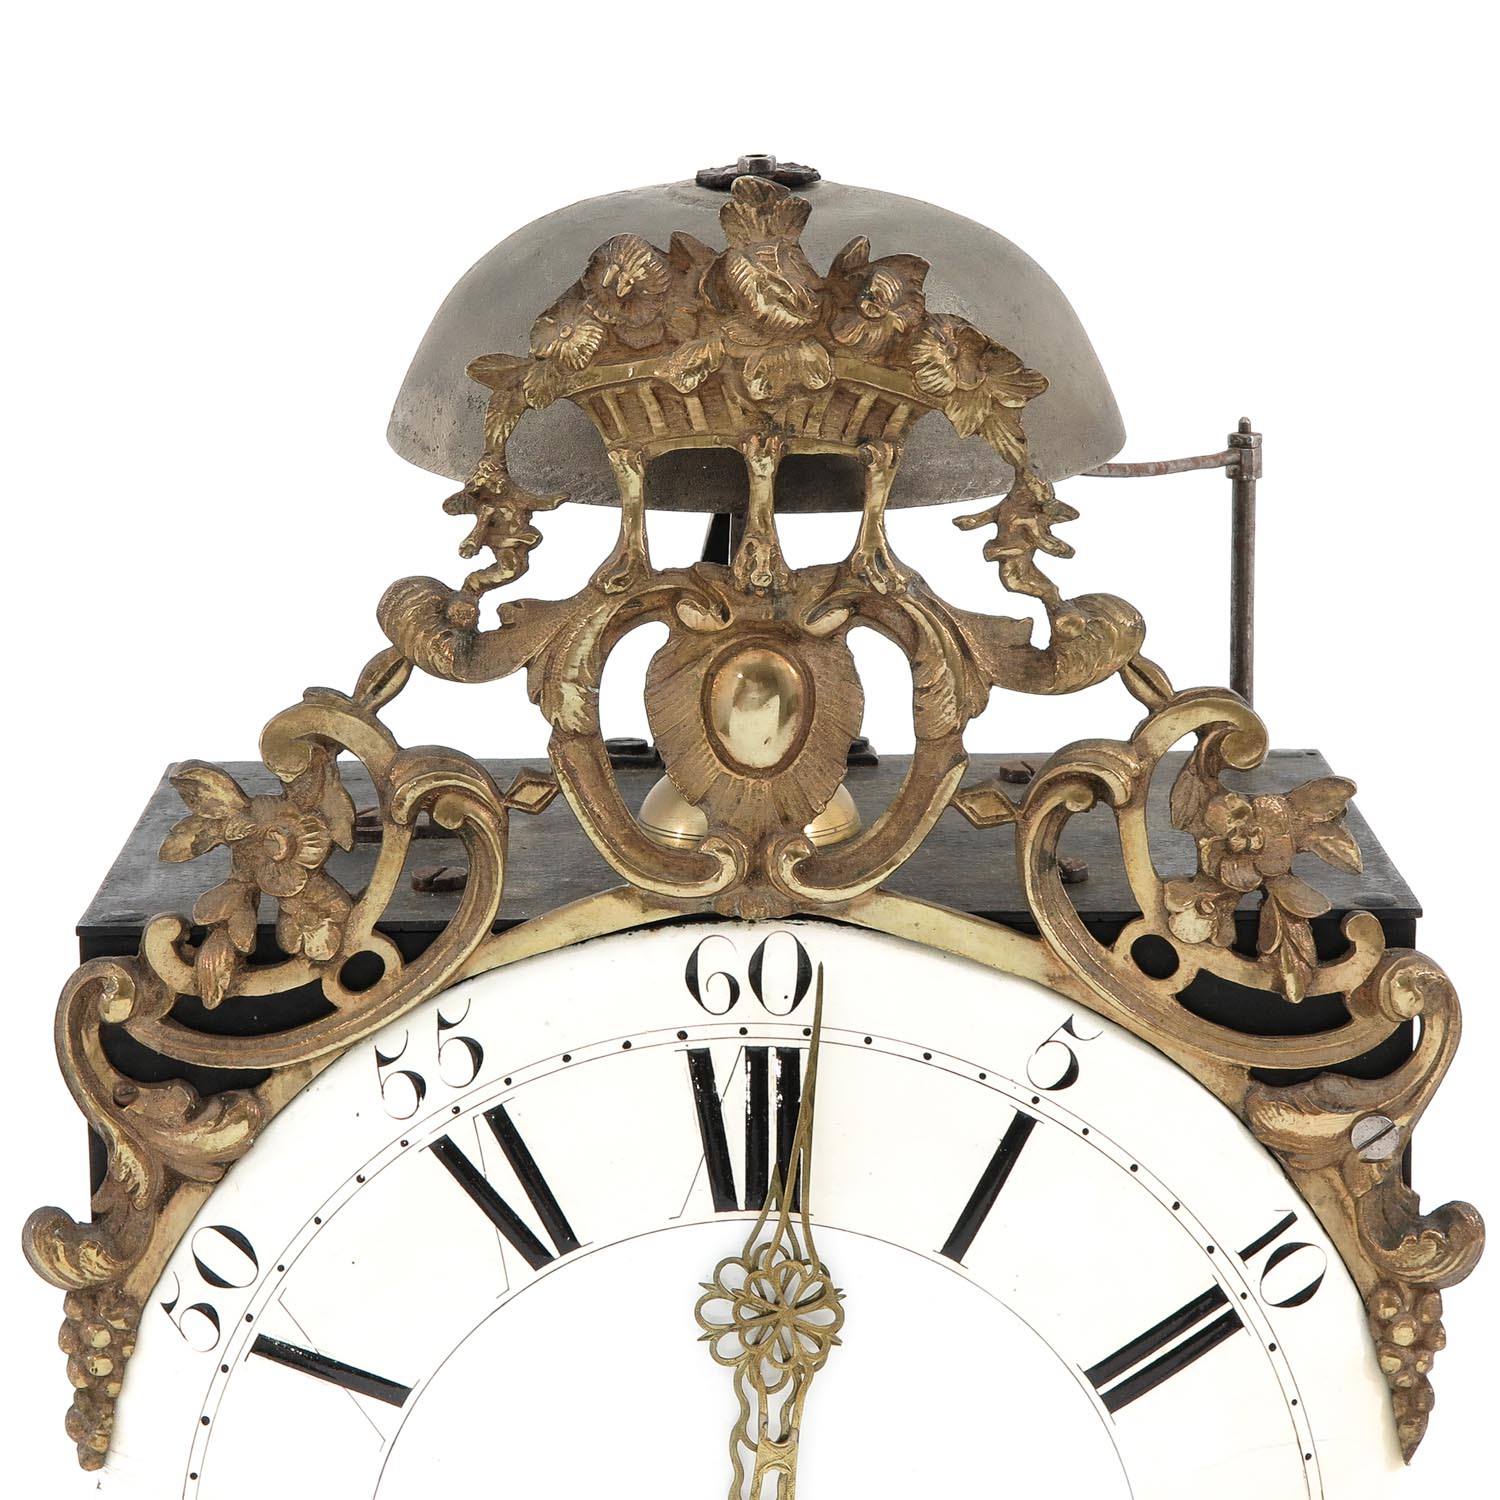 An Unusally Large French Comtoise Clock - Image 8 of 8